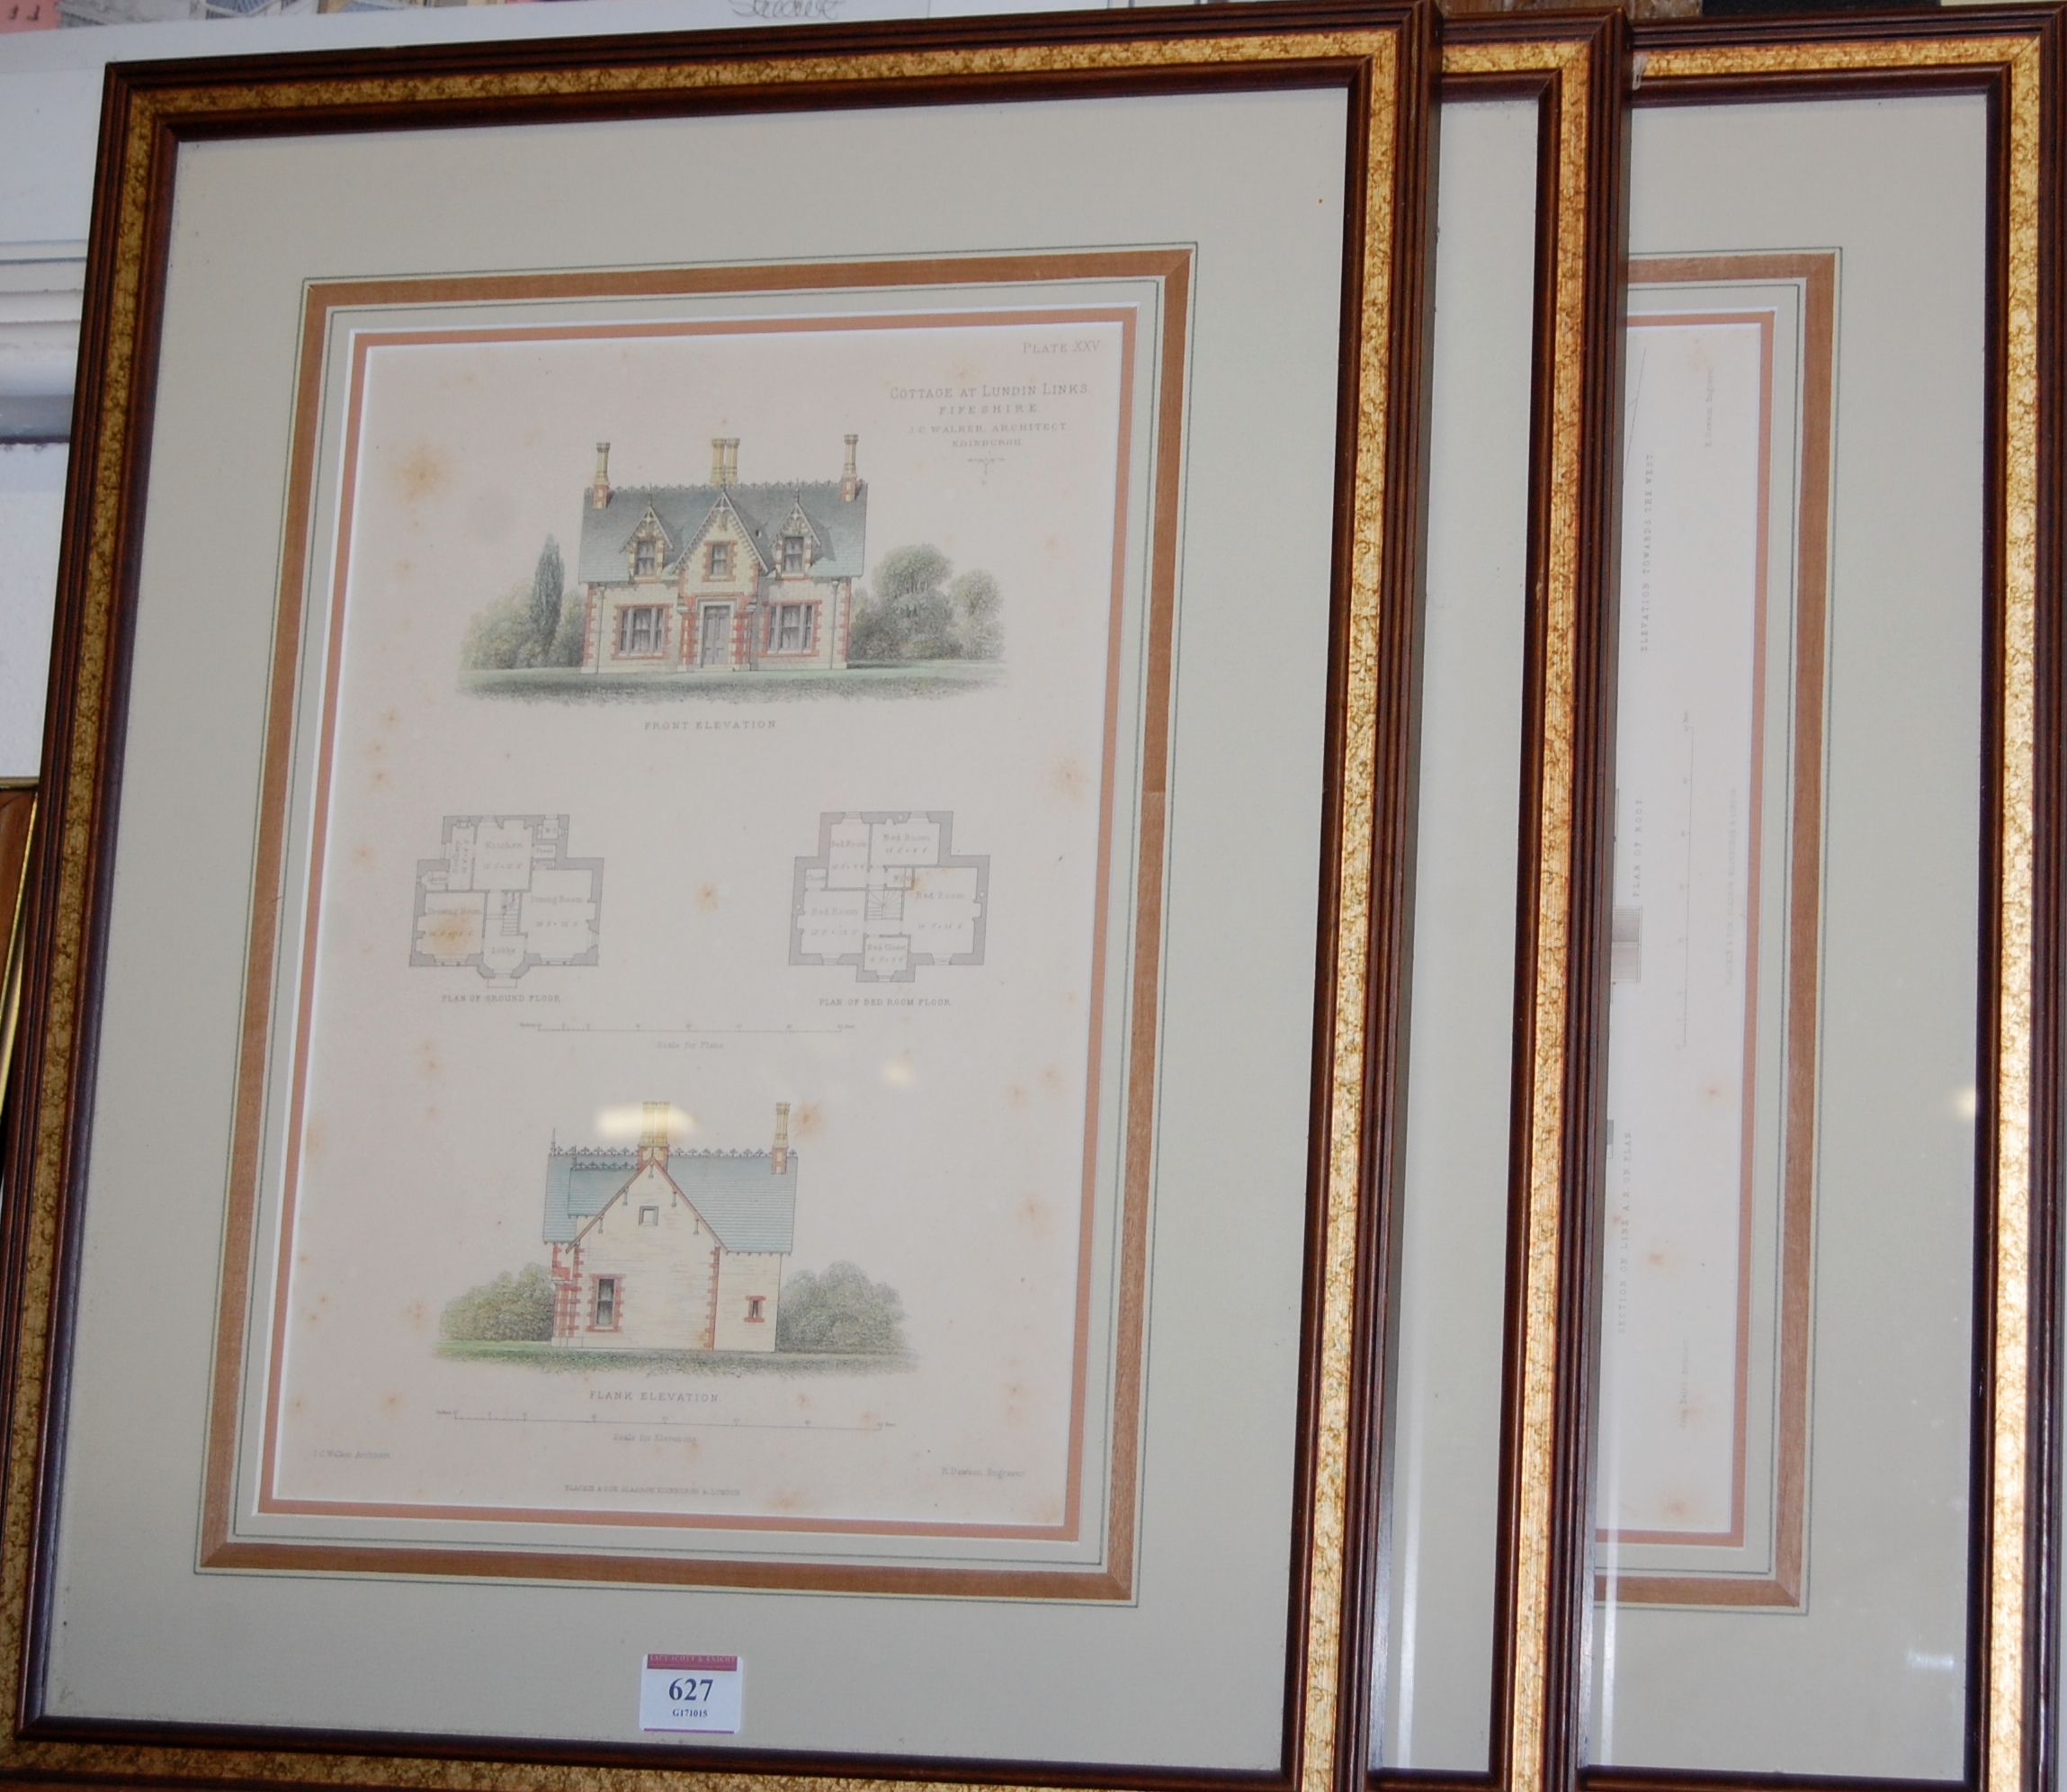 Three framed architectural engravings, each published by Blackie & Son of Glasgow,